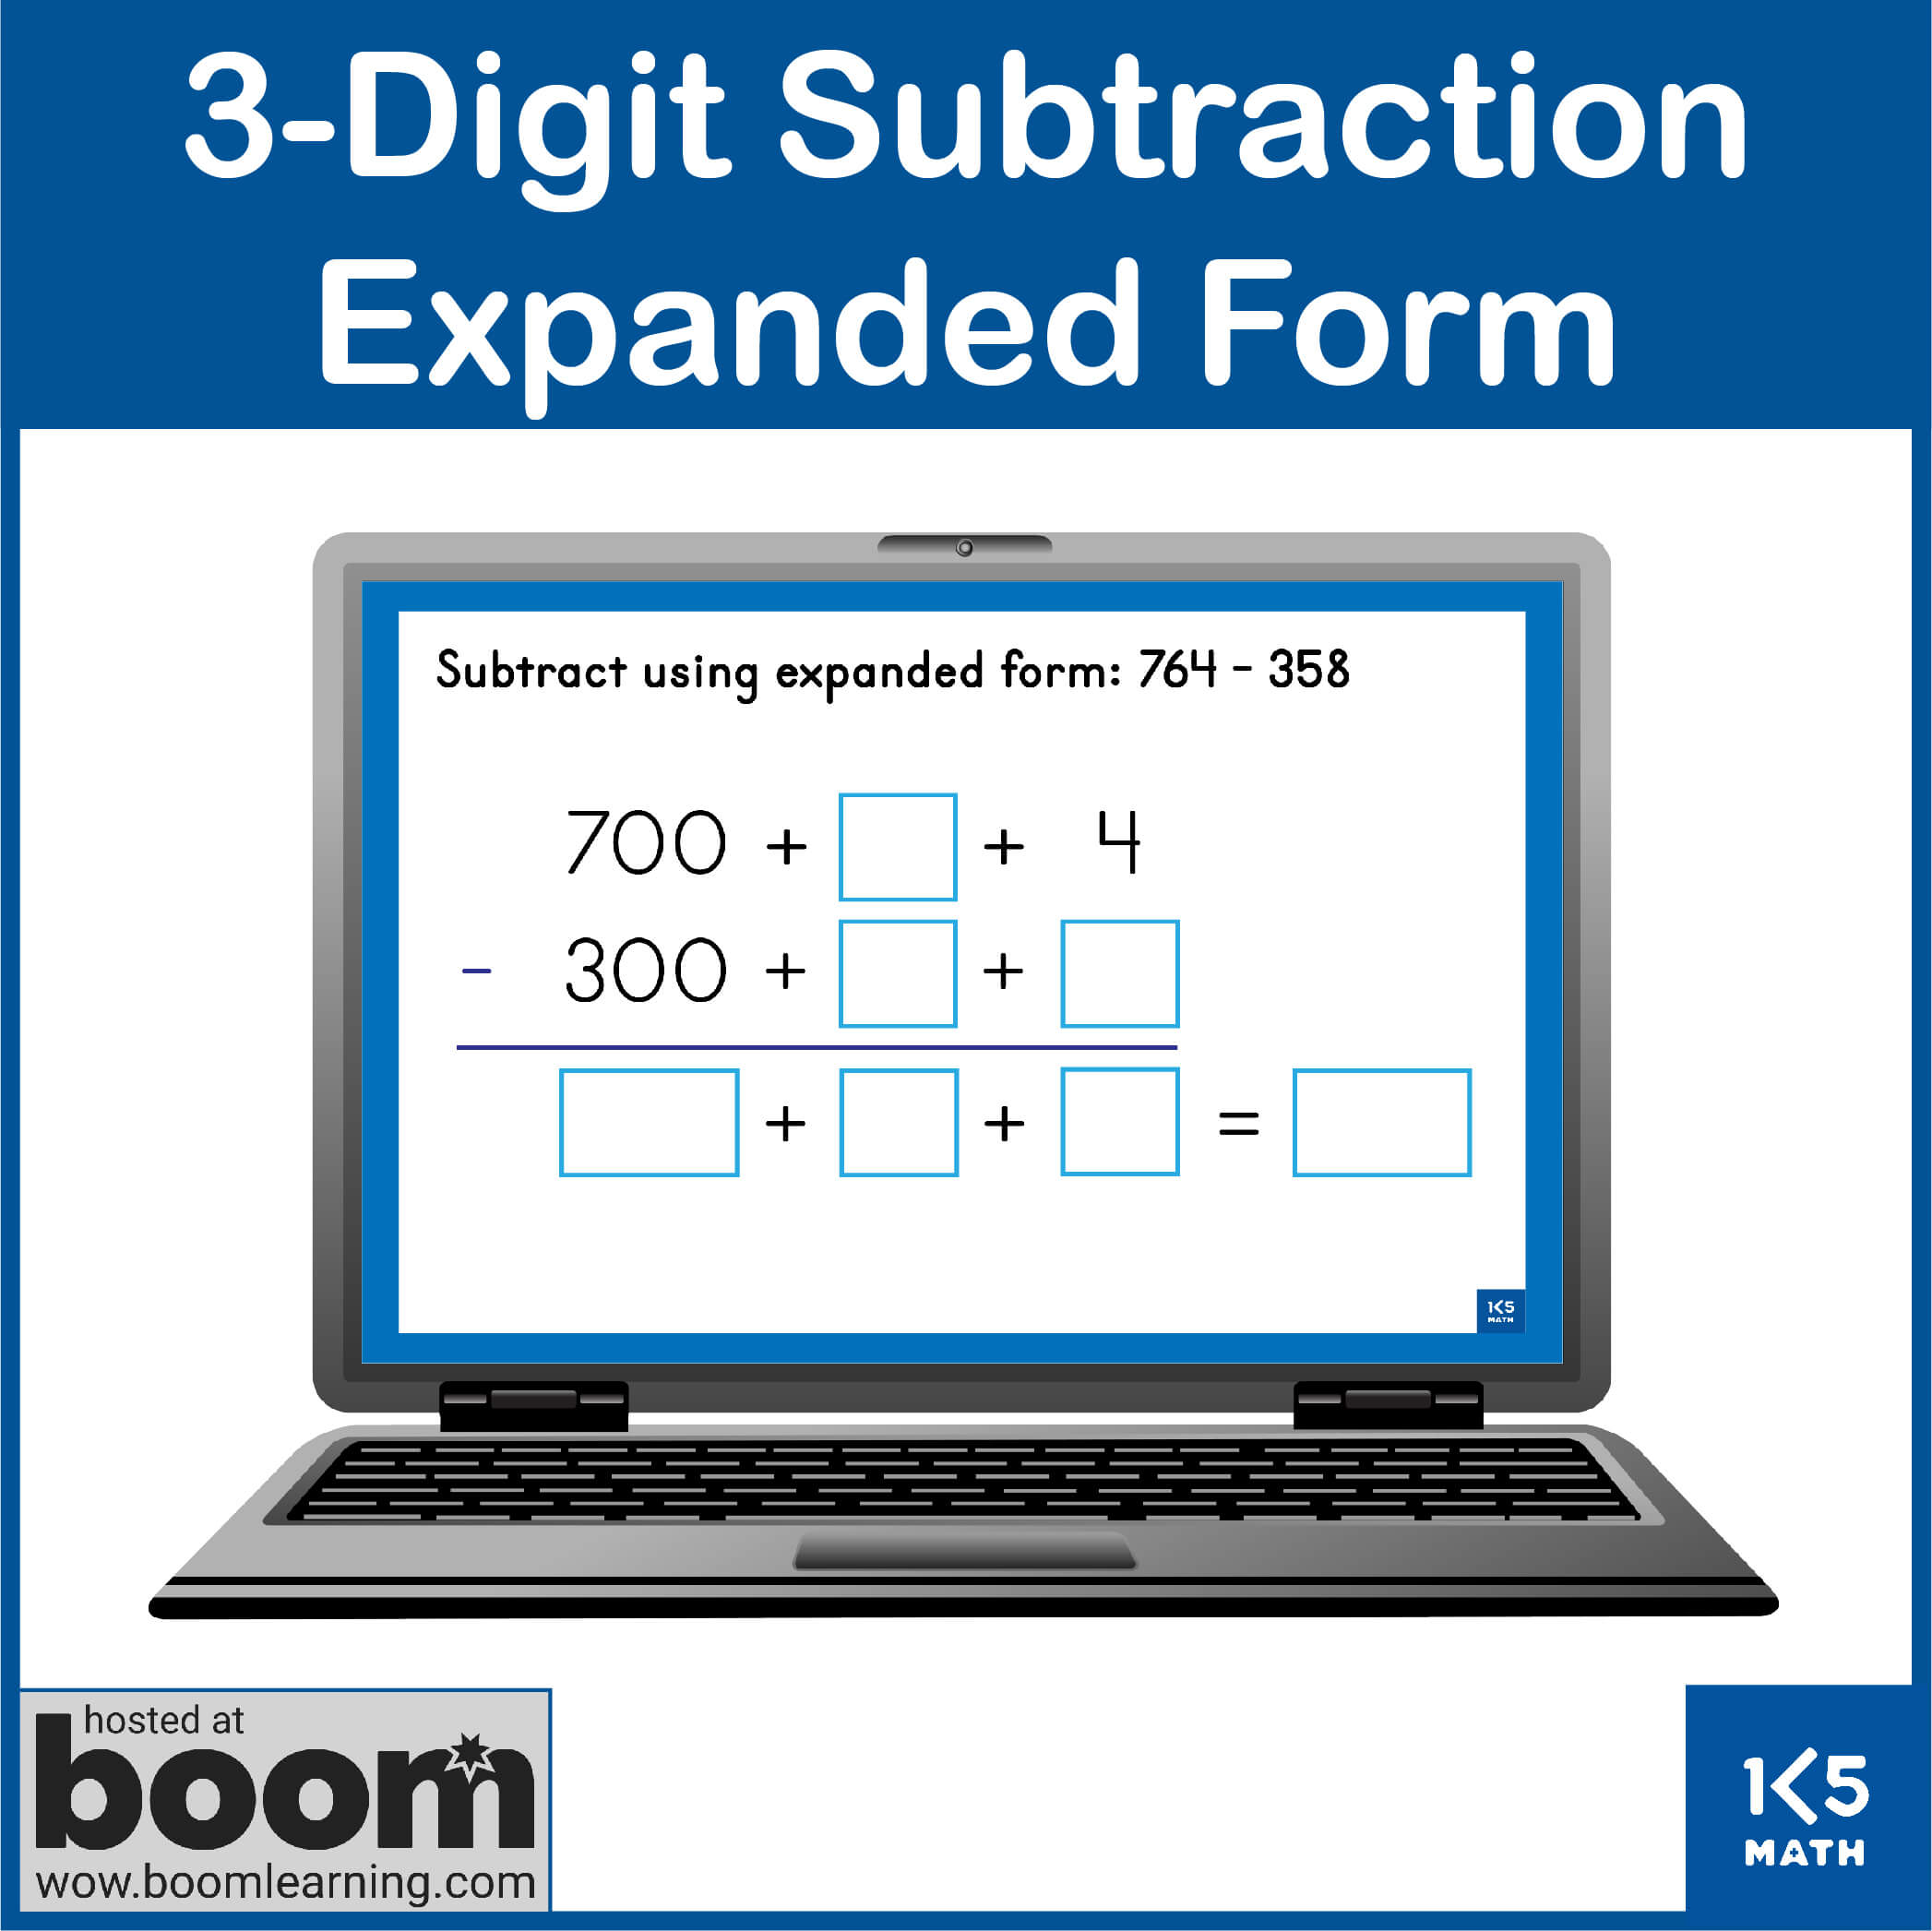 Boom Cards: 3-Digit Subtraction Expanded Form